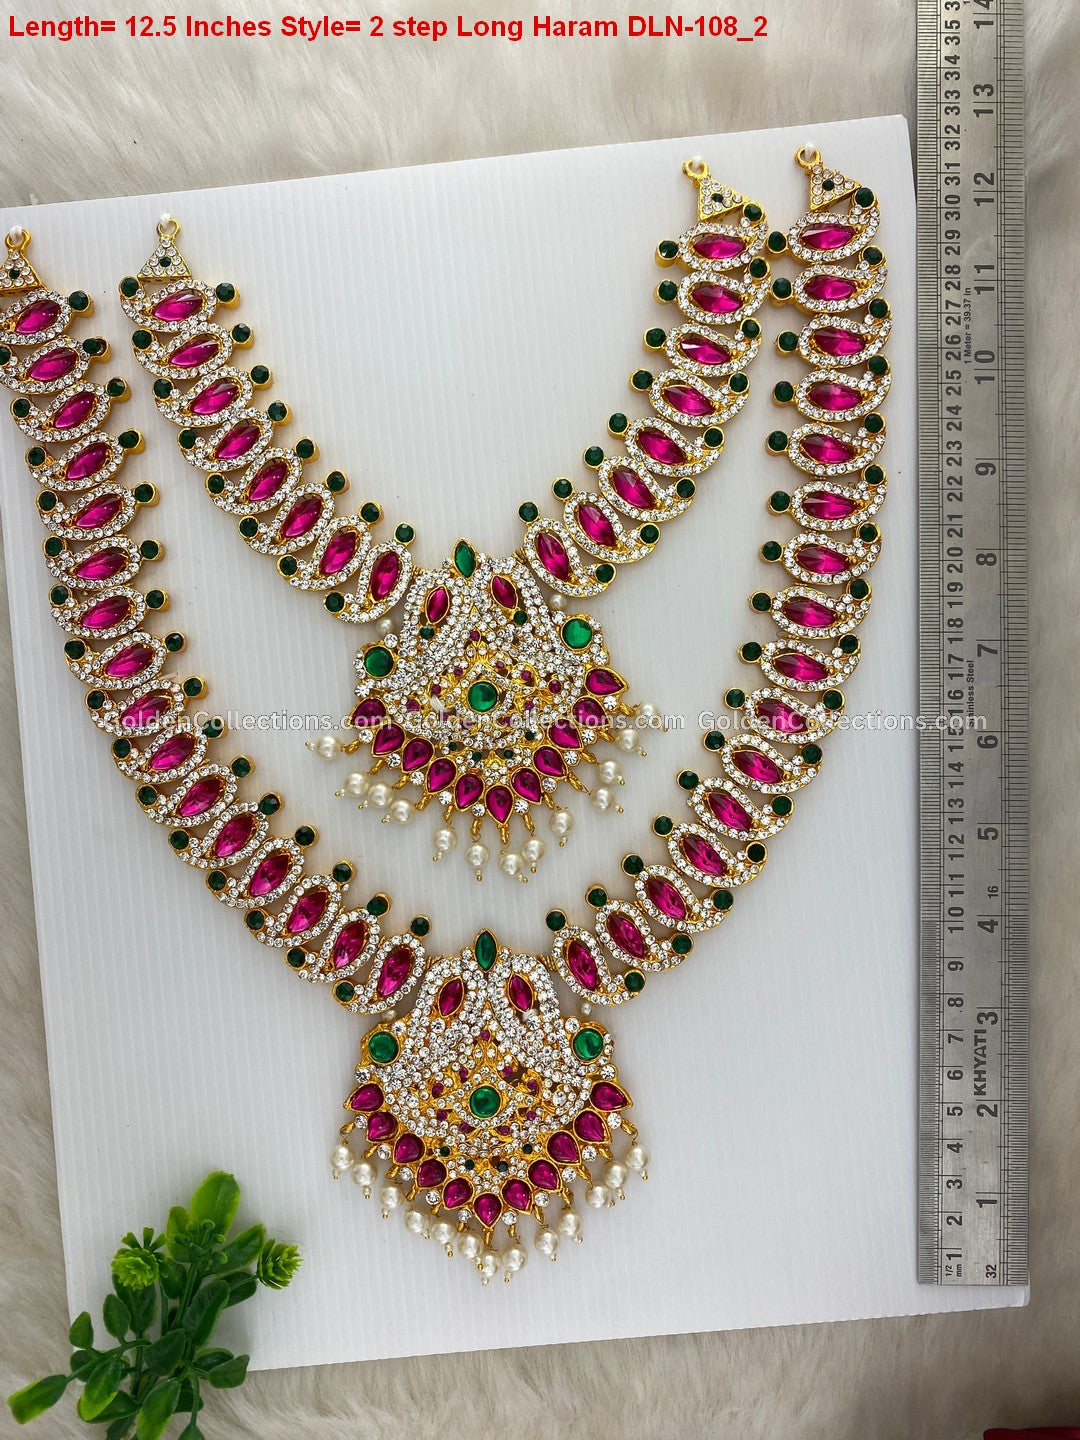 Exclusive Temple Deity Long Necklace - DLN-108 2